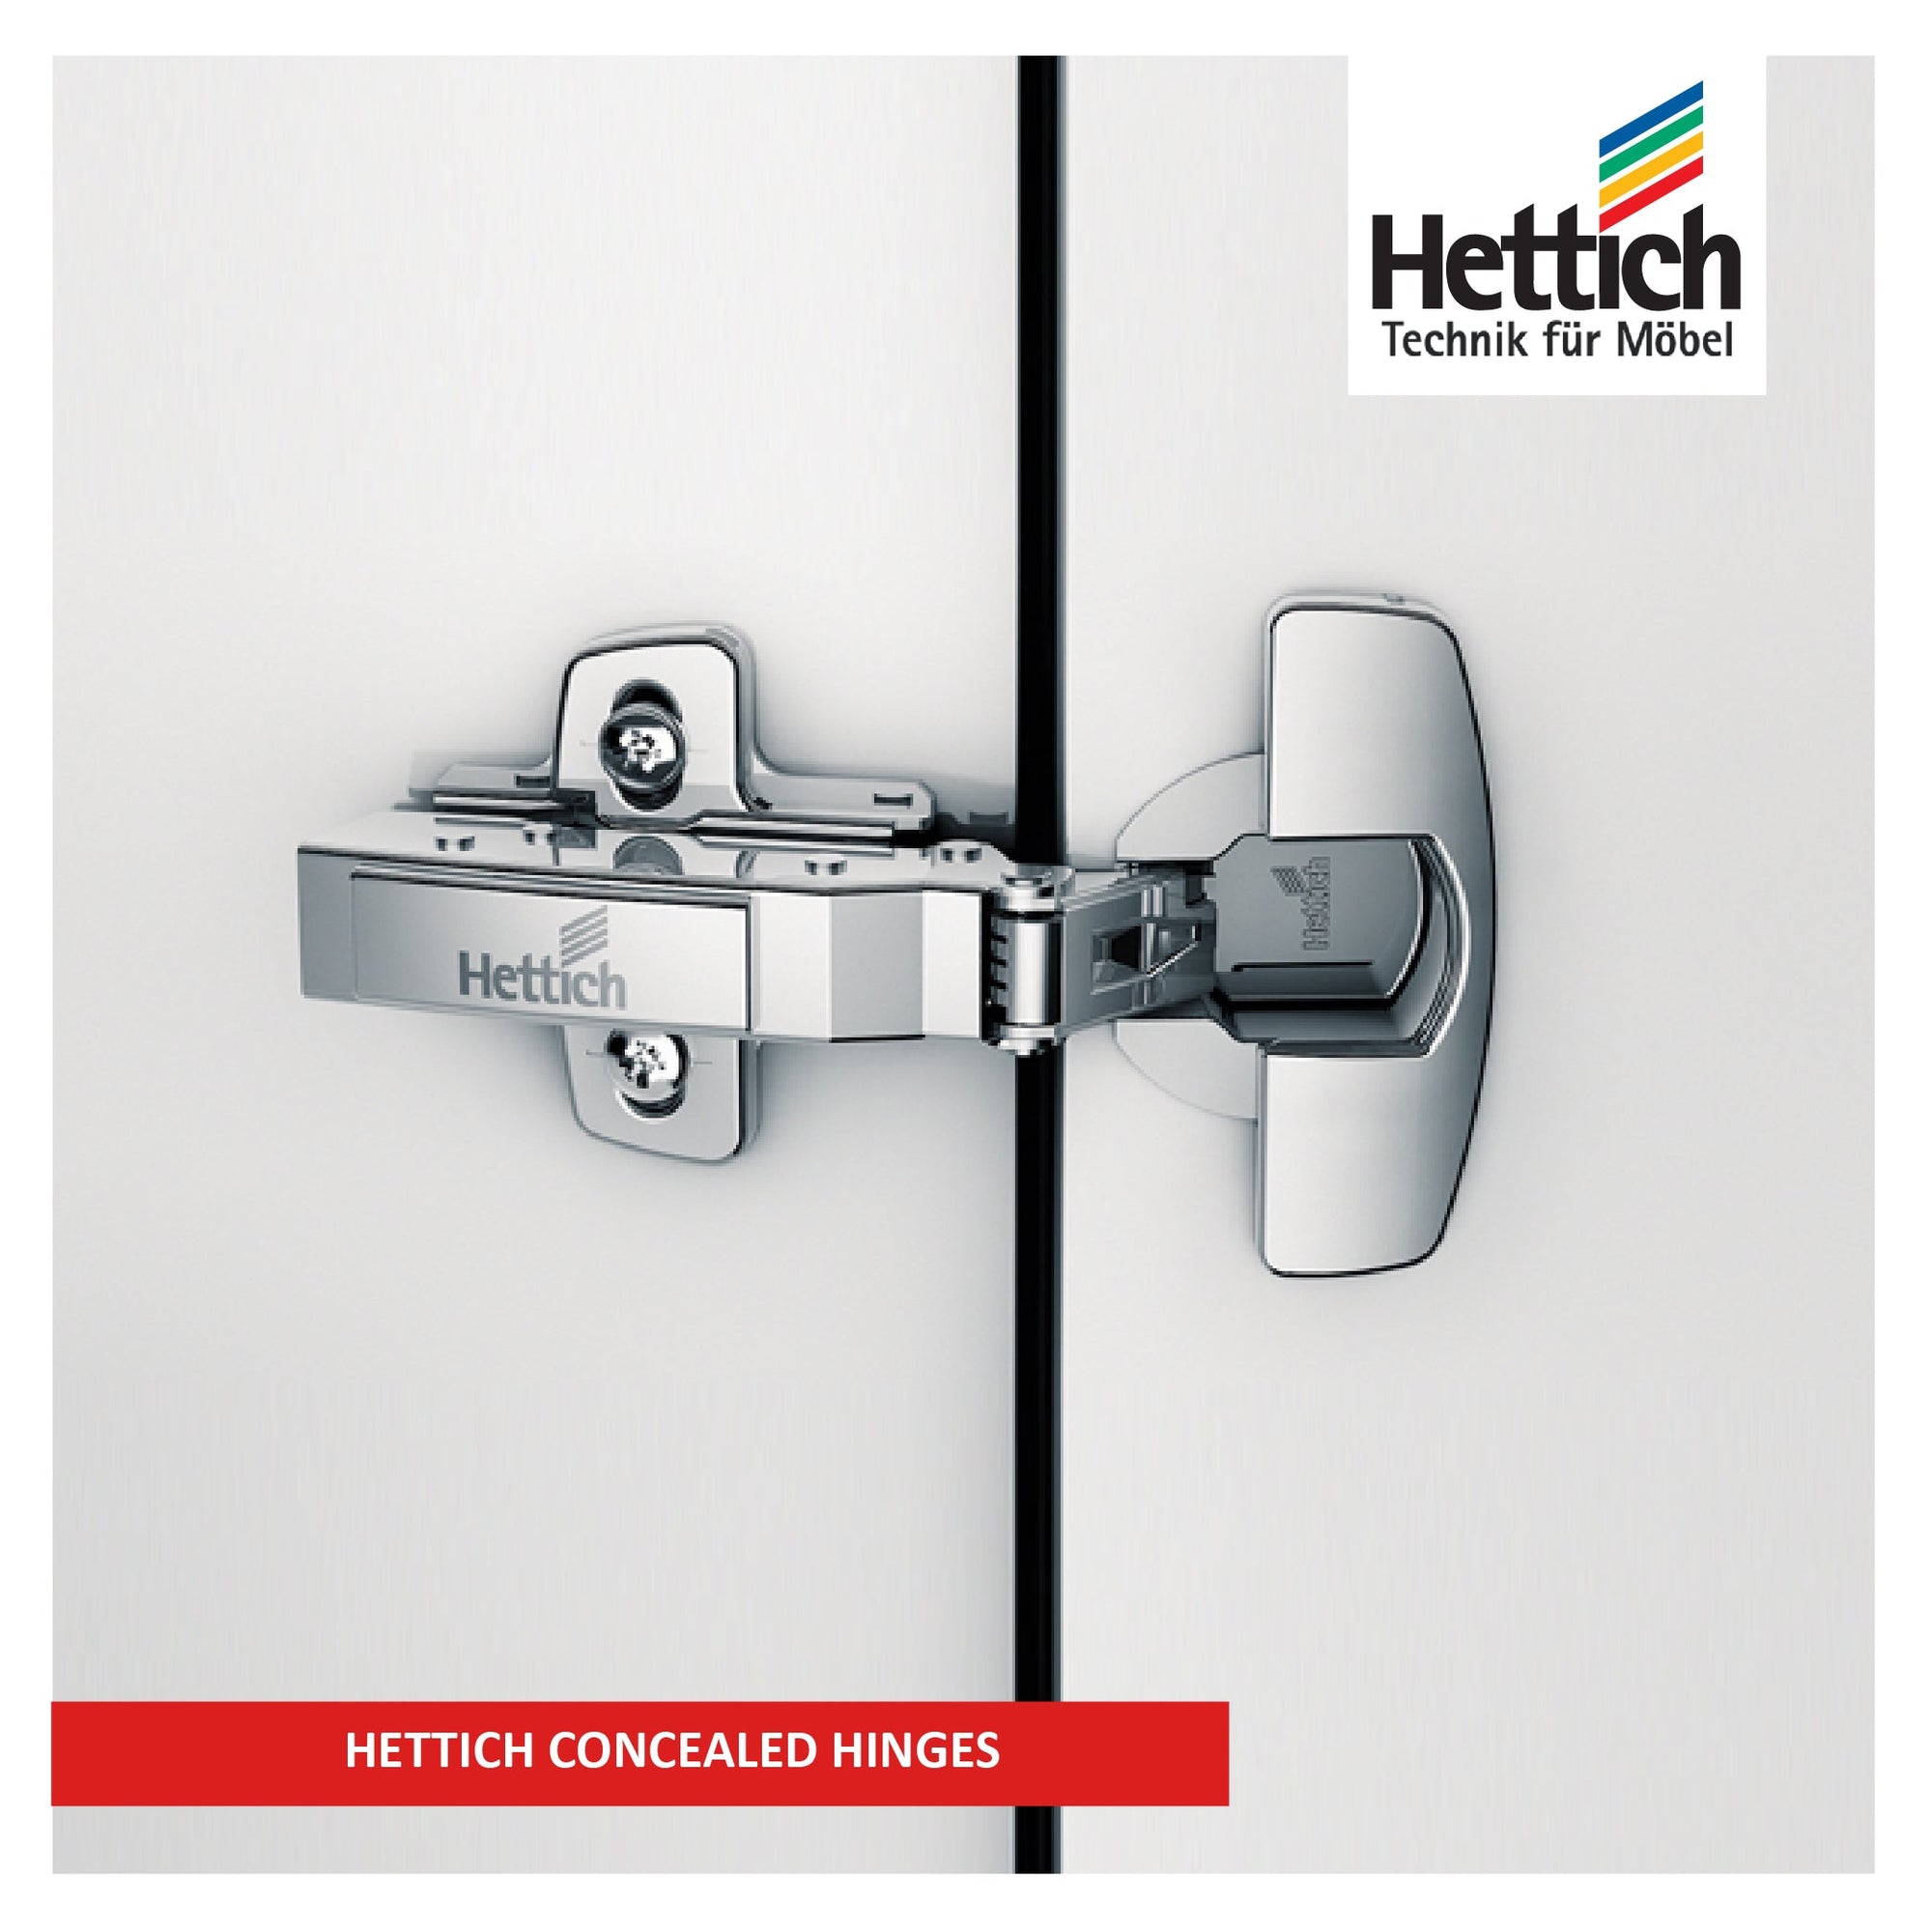 Hettich Concealed Hinges - High-quality hardware for seamless cabinet doors